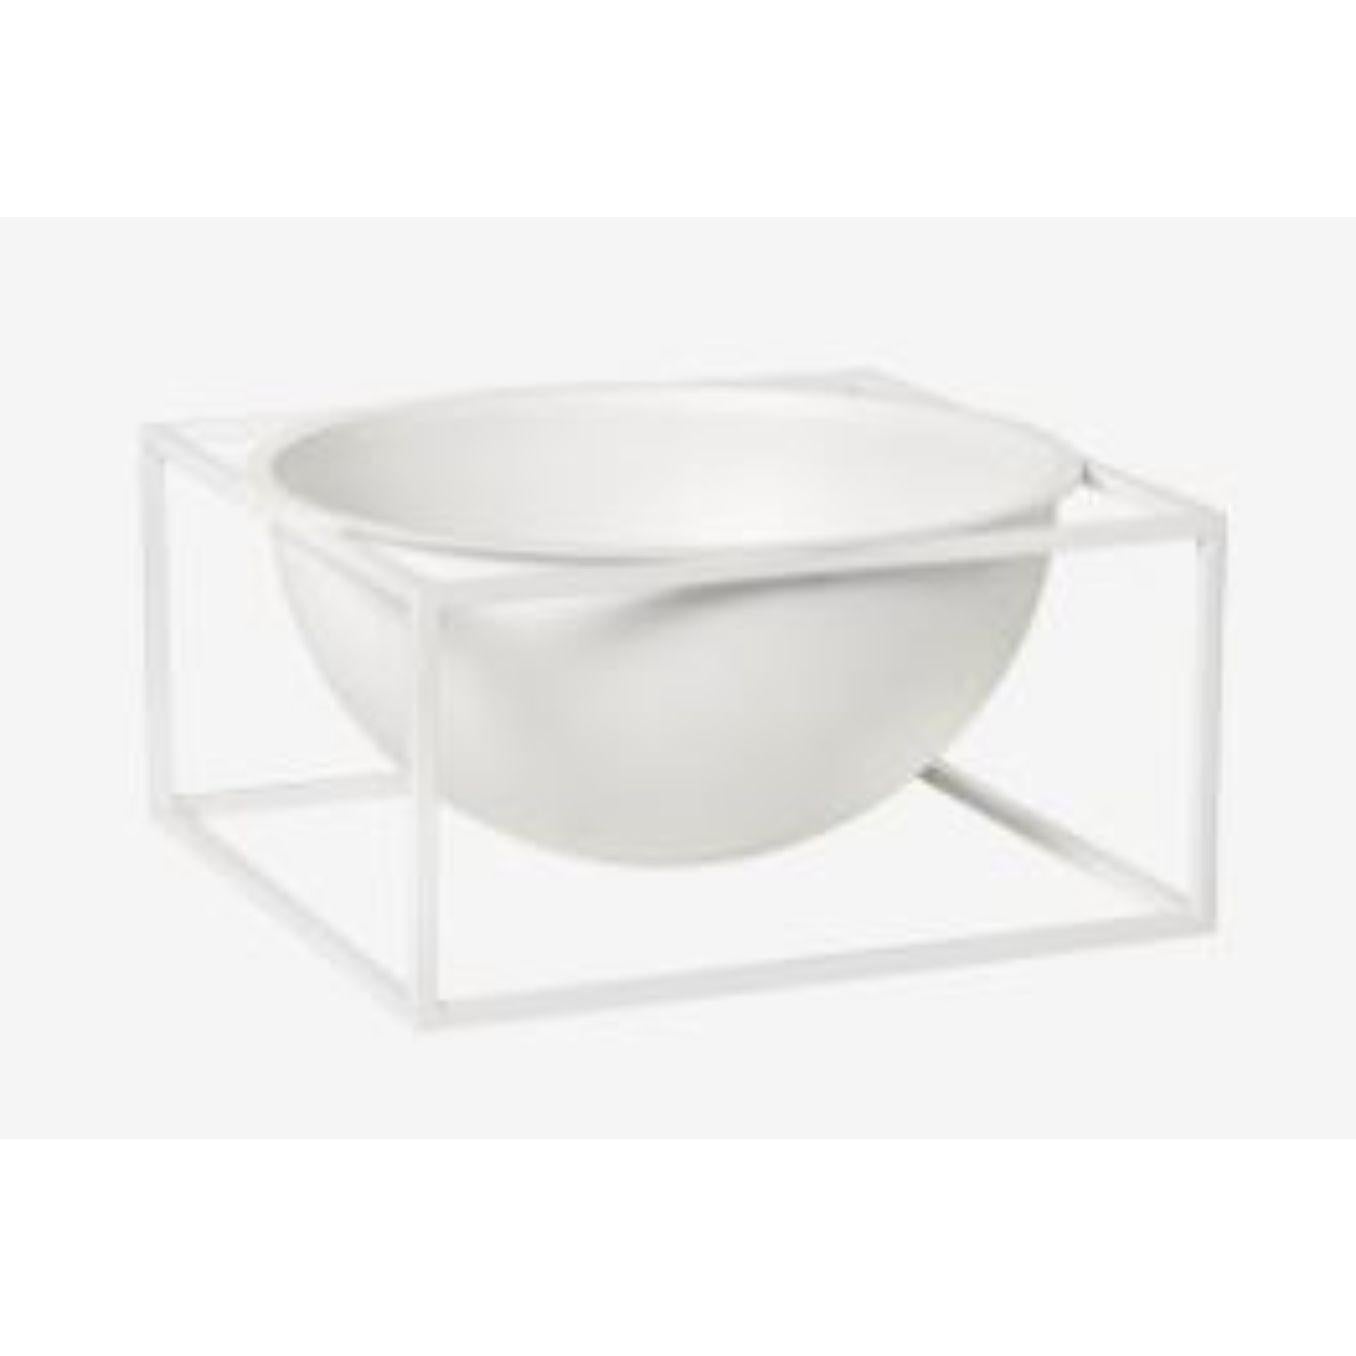 White large centerpiece Kubus bowl by Lassen
Dimensions: d 23 x w 23 x h 11.50 cm 
Materials: Metal 
Weight: 3 Kg

The dictionary definition is “an object occupying a central, especially an adornment in the center of a table” and the Kubus